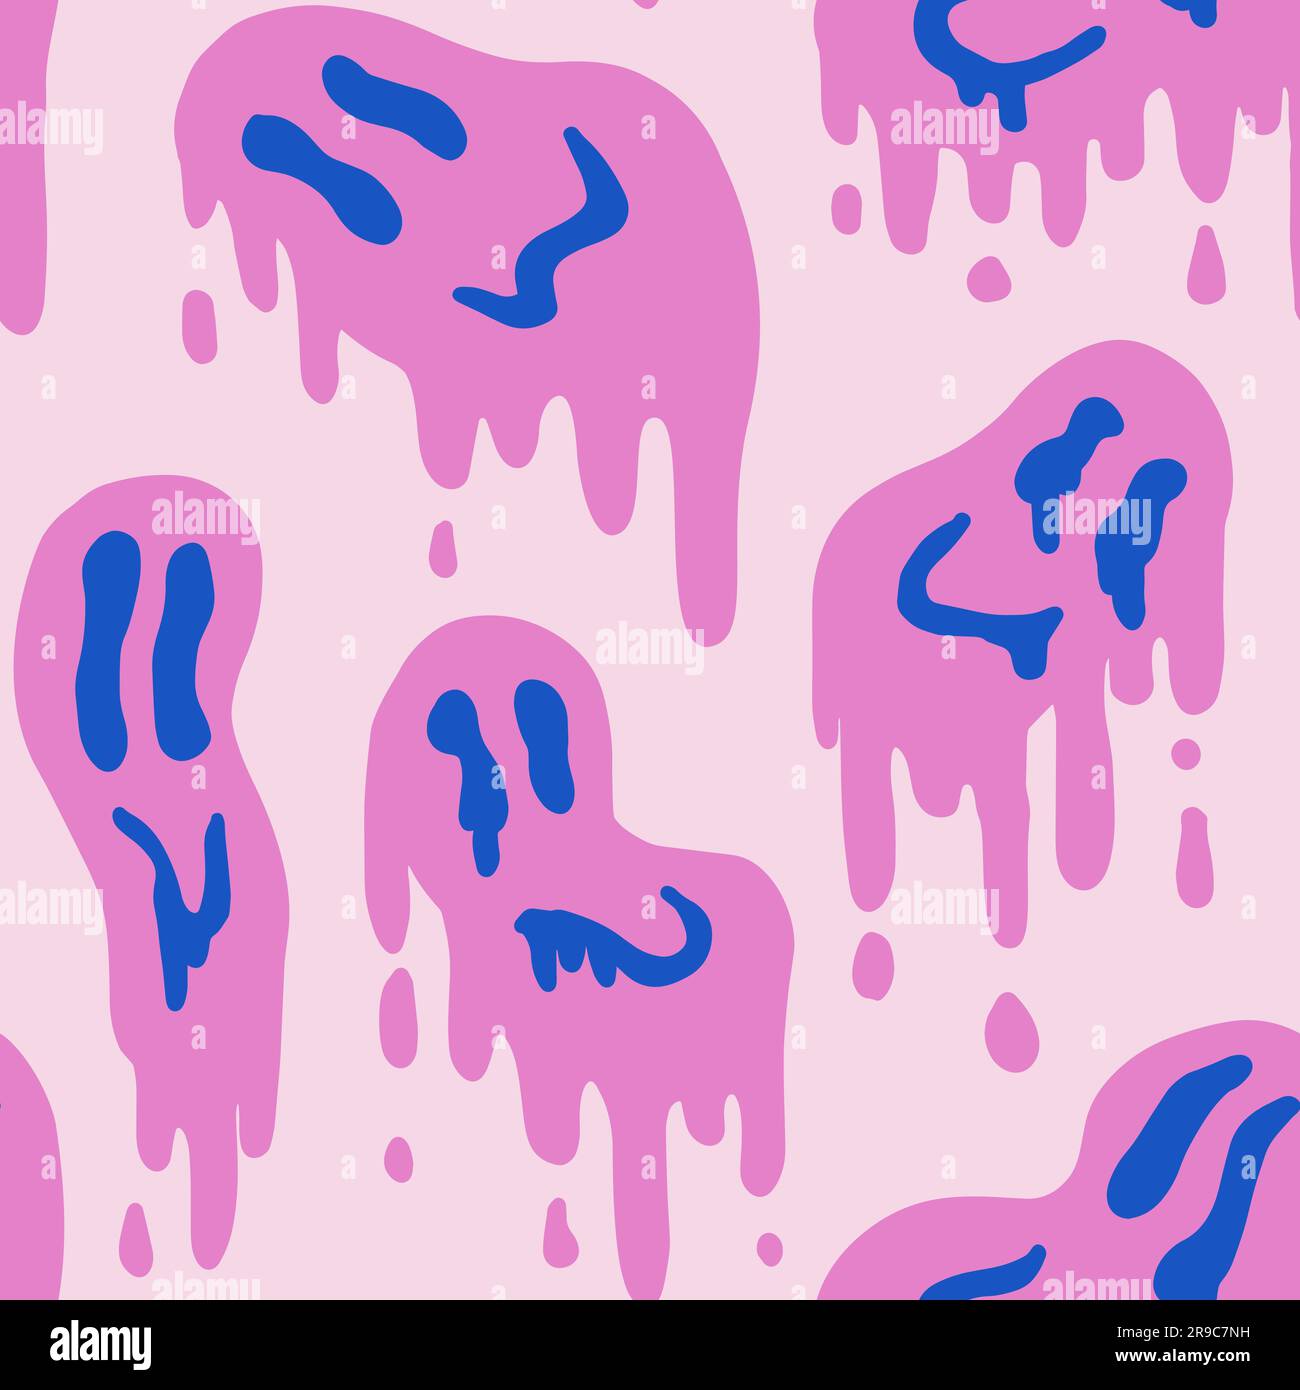 1970 Fluid Smile Pattern on Pink and Blue Color. Seventies Style, Trippy Psychedelic Print, Wallpaper. Flat Design, Hippie Aesthetic. Hand-Drawn Vector Illustration. Stock Vector